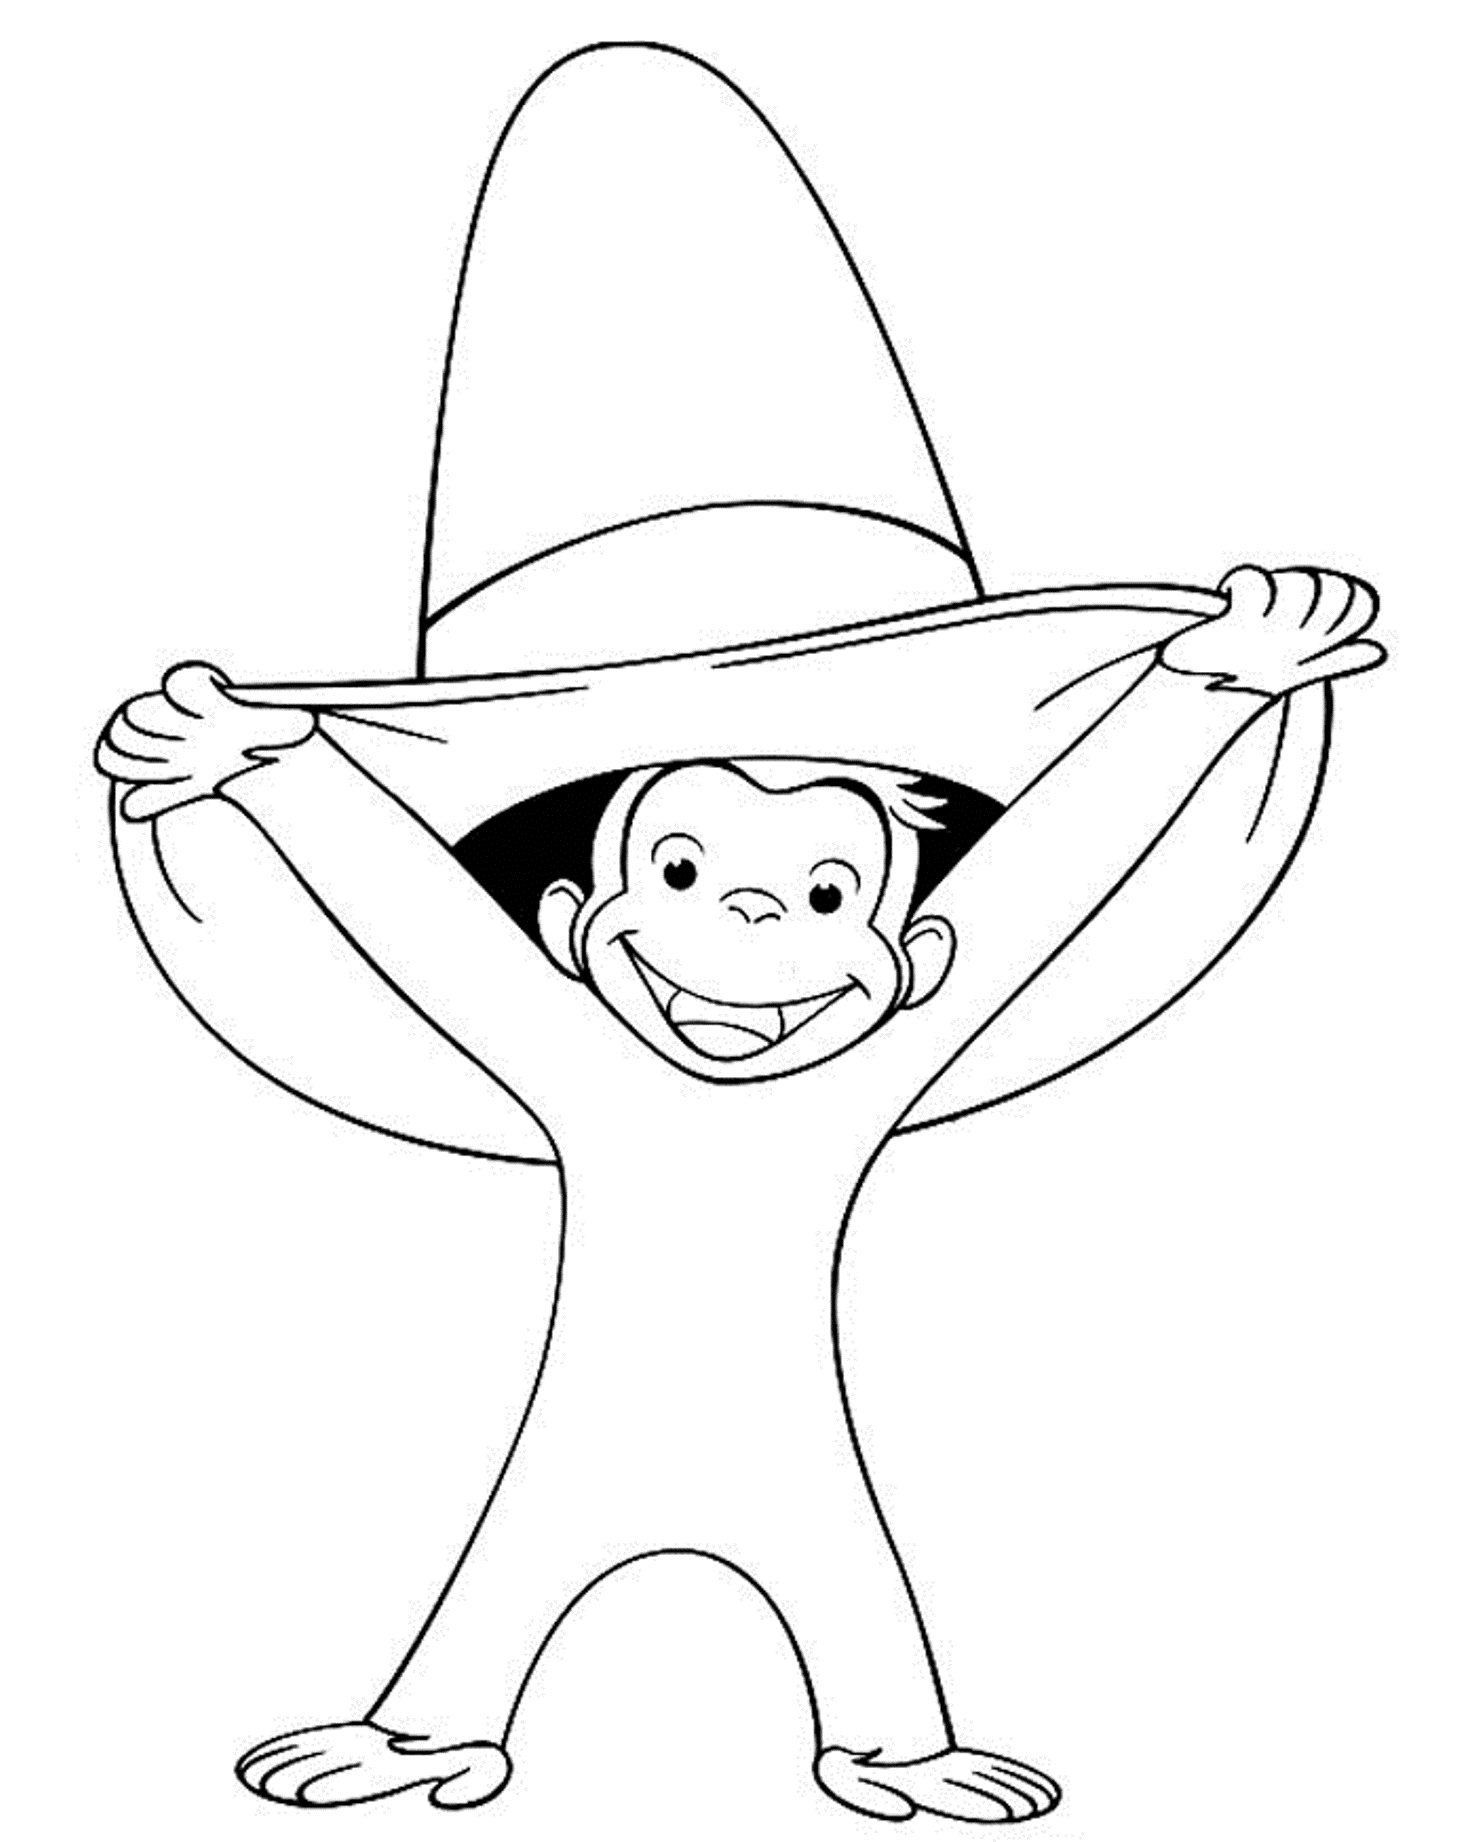 Curious George Coloring Pages Free Printable | Cartoon Coloring ...